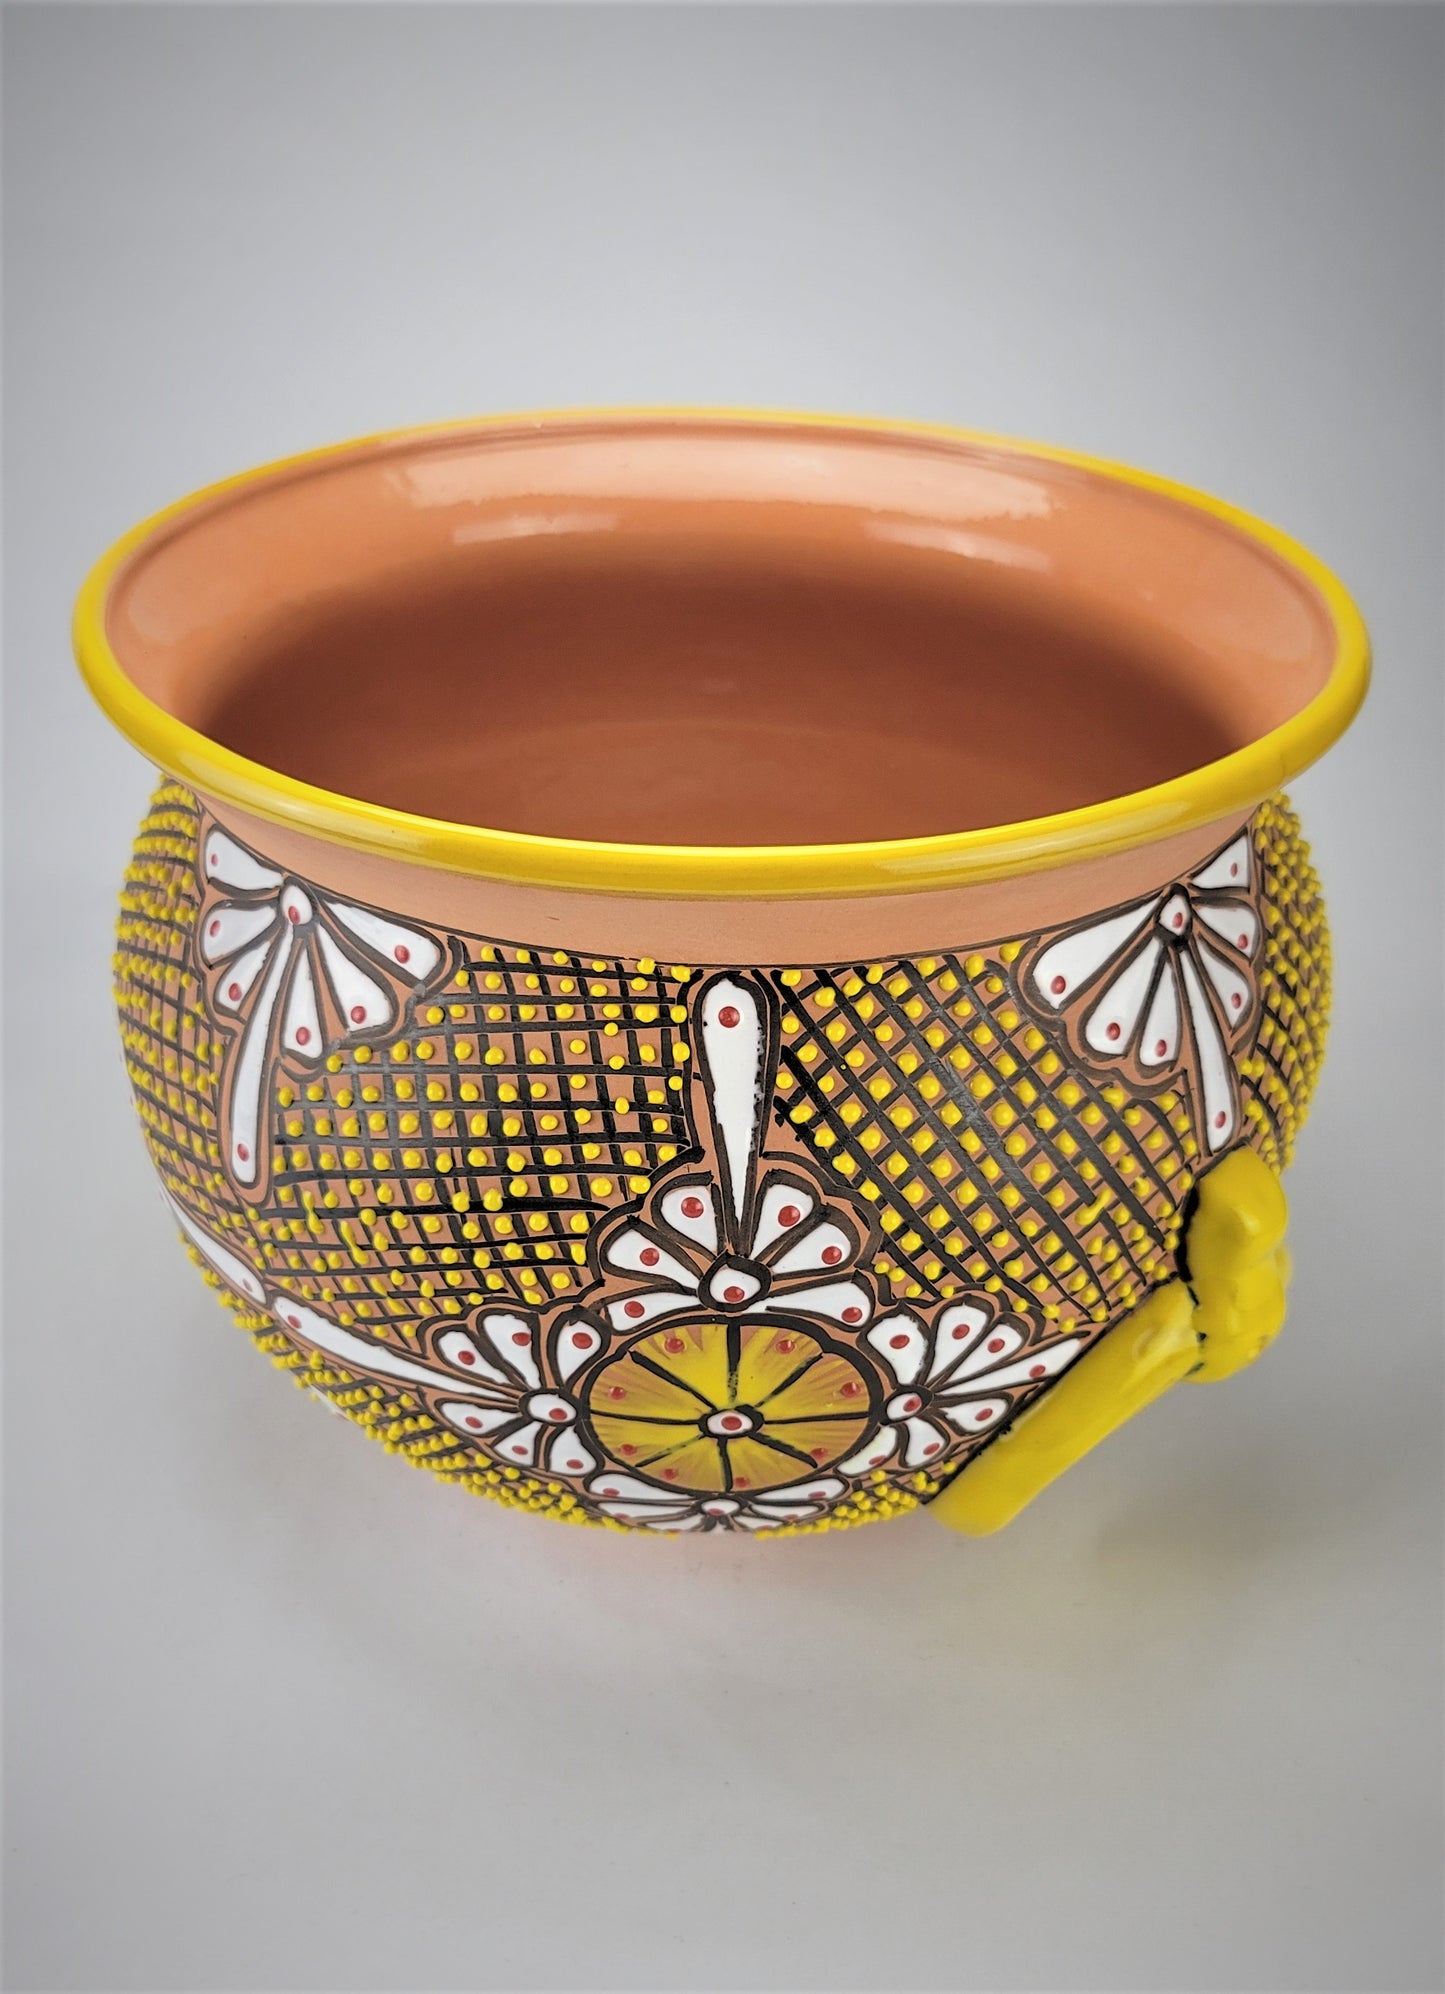 Mexican Pottery Hand-Crafted Floral Design Planter Yellow